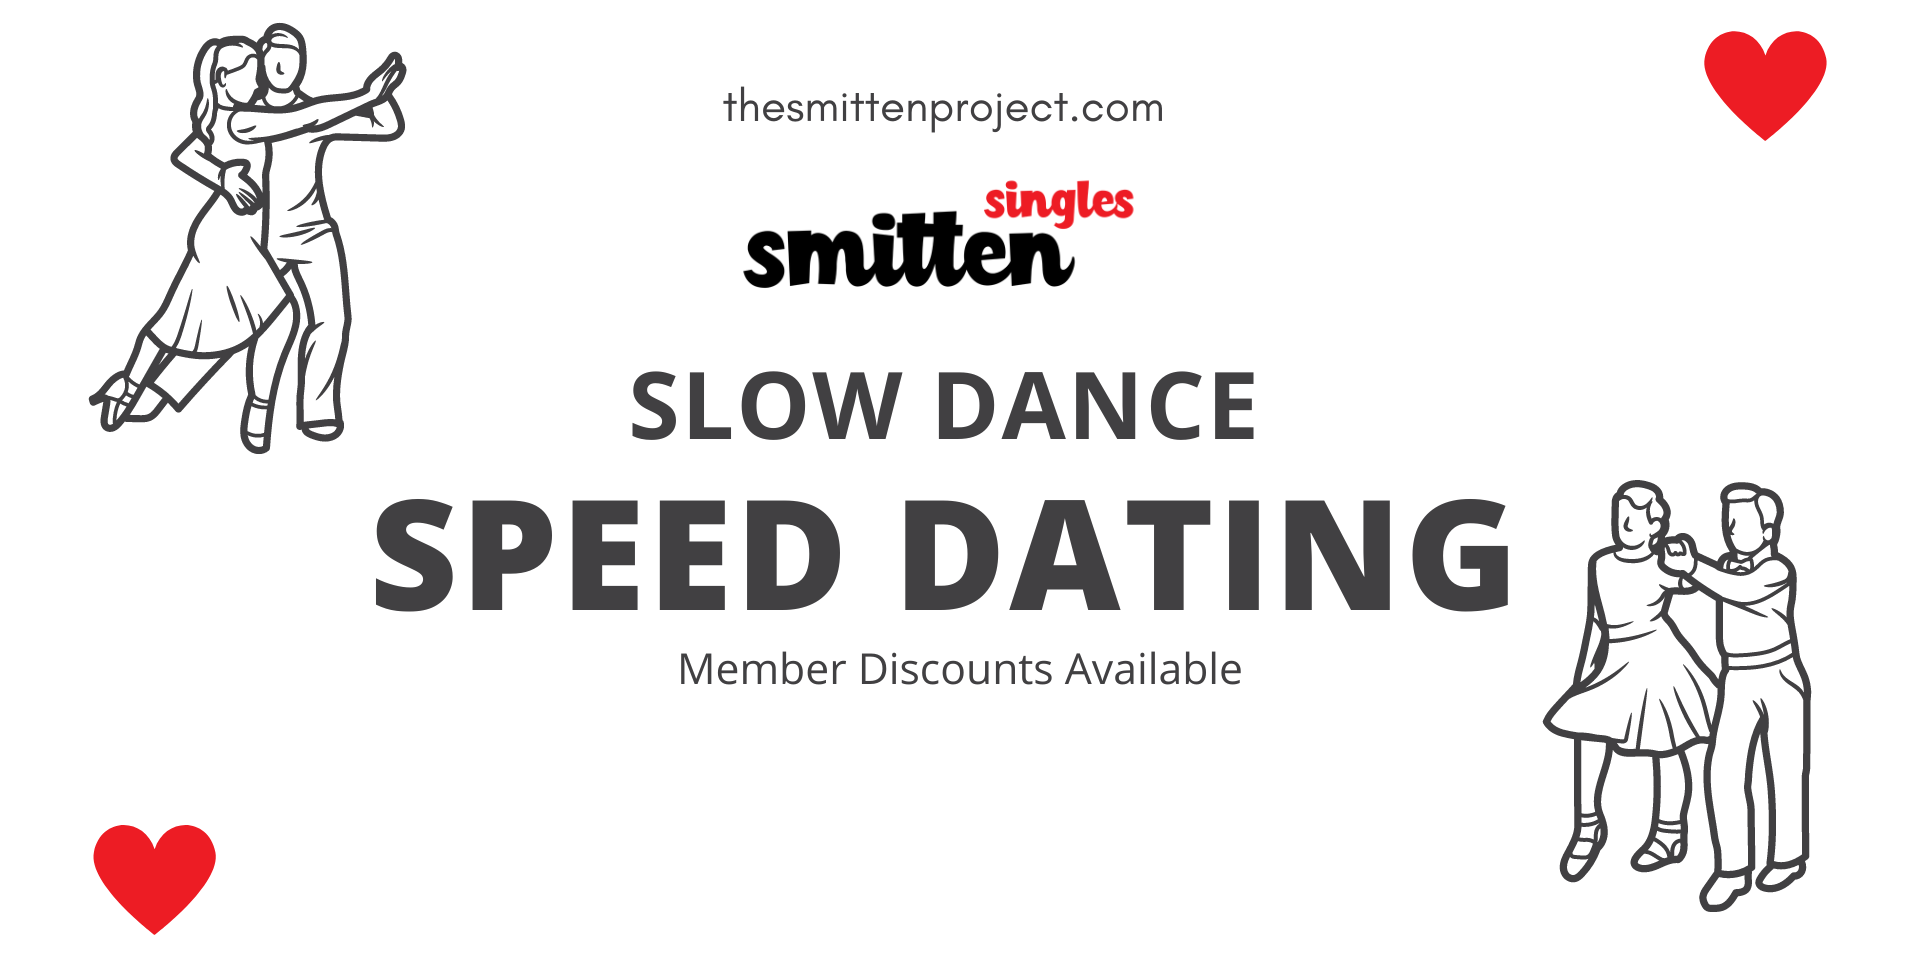 Slow Dance Speed Dating promotional image